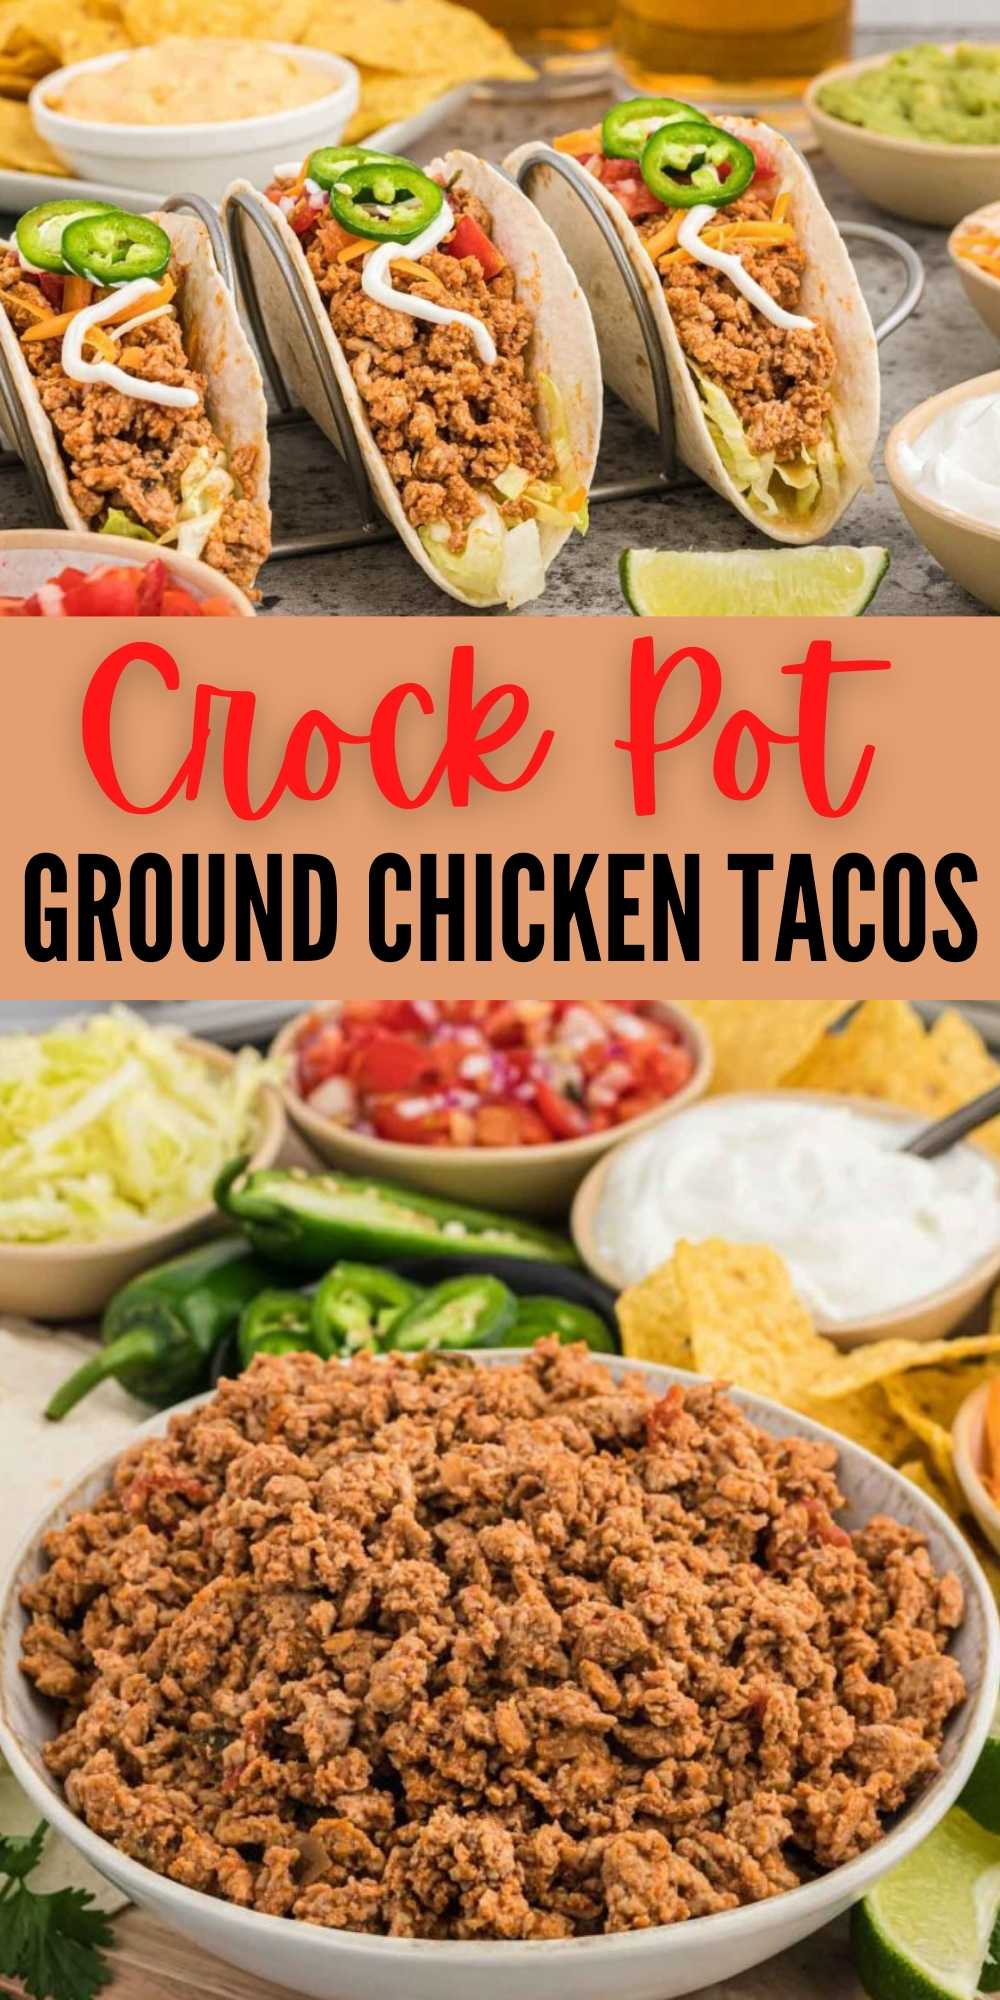 You will love this Quick Ground Chicken Tacos in the Slow Cooker. This recipe requires simple ingredients to make these amazing tacos. This recipe is easy to make in a crock pot and so healthy and delicious too! #eatingonadime #crockpotrecipes #slowcookerrecipes #tacorecipes #chickenrecipes 
